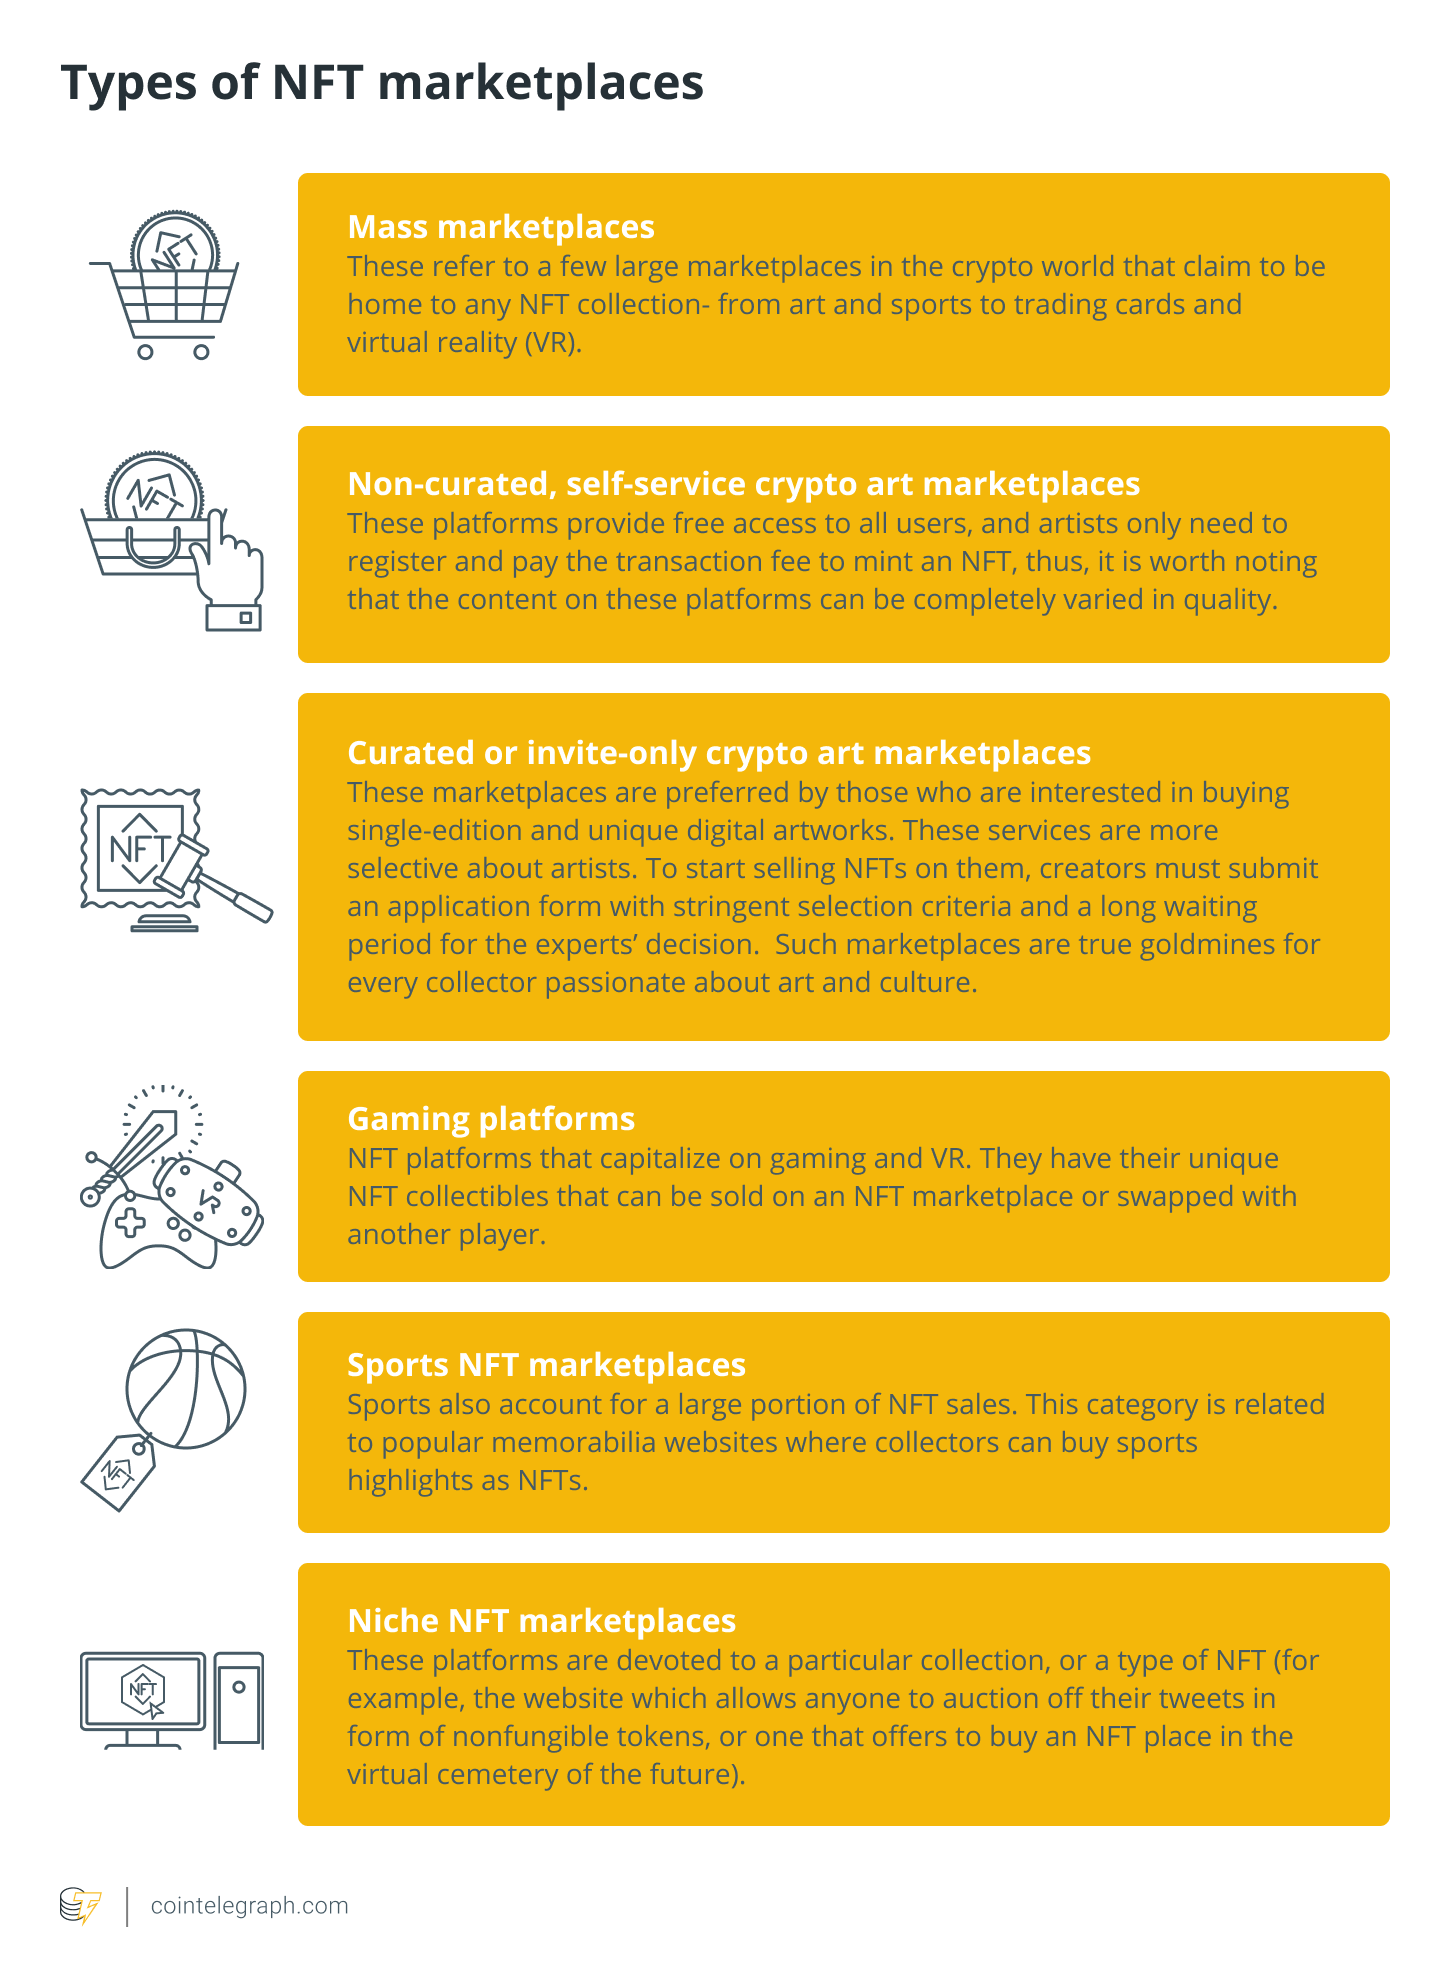 Types of NFT marketplaces